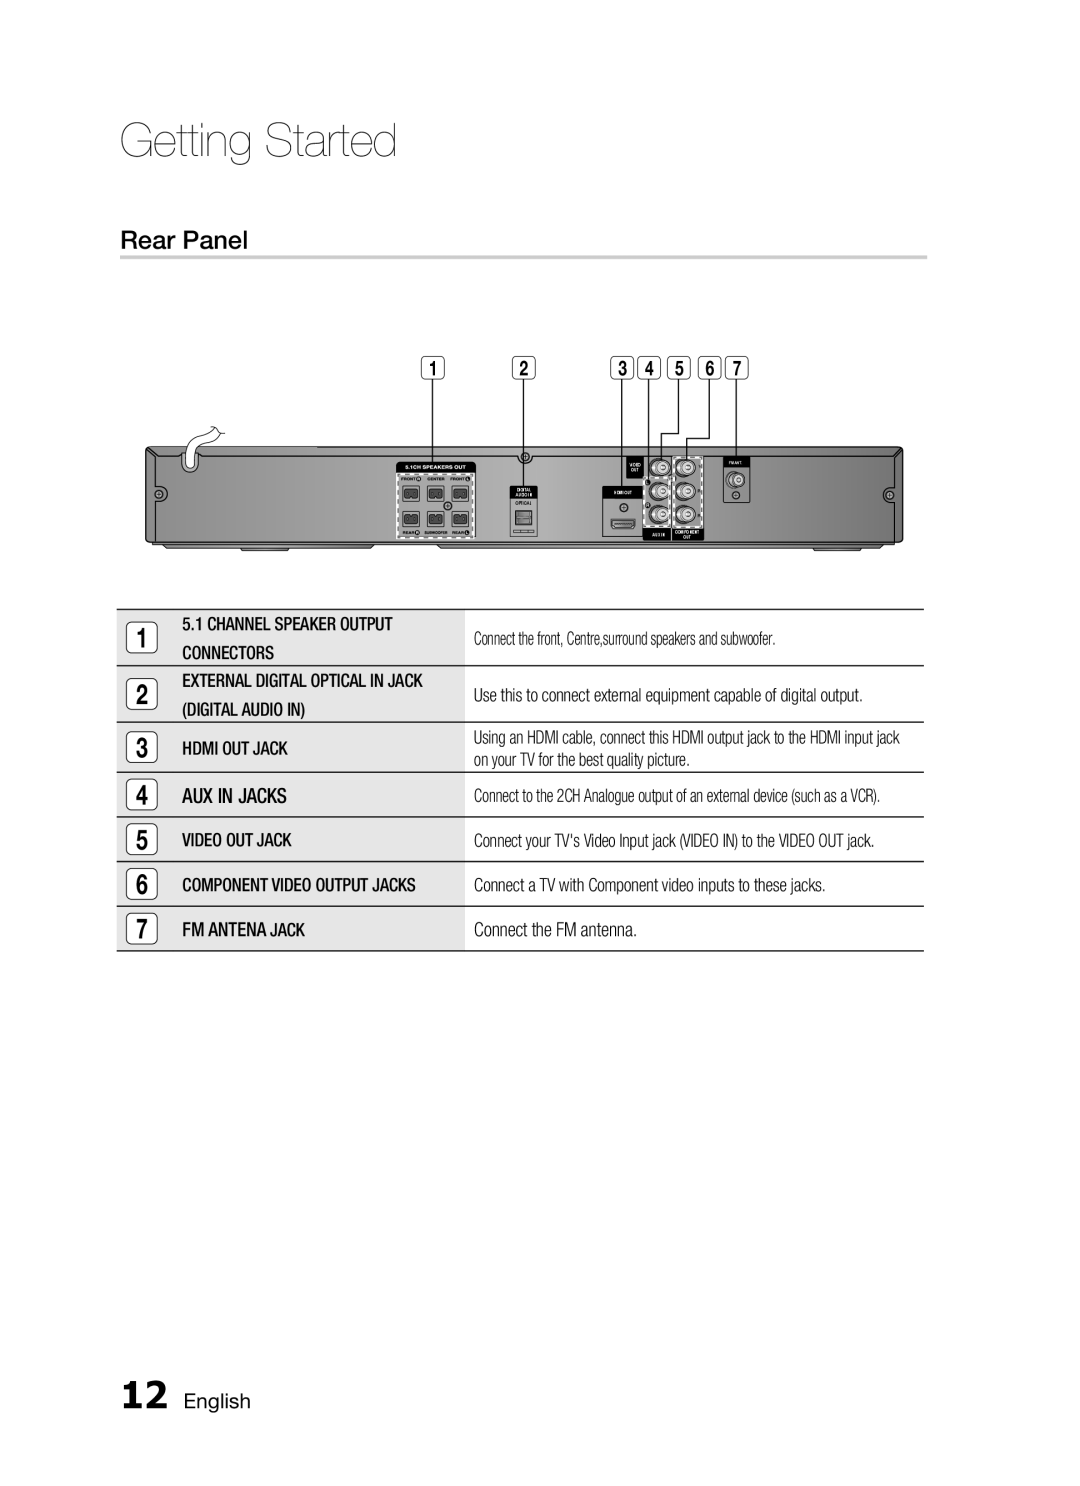 Samsung HT-C455N/MEA, HT-C453N/MEA, HT-C445N/MEA, HT-C455N/HAC manual Rear Panel, Aux In Jacks, English, Getting Started 